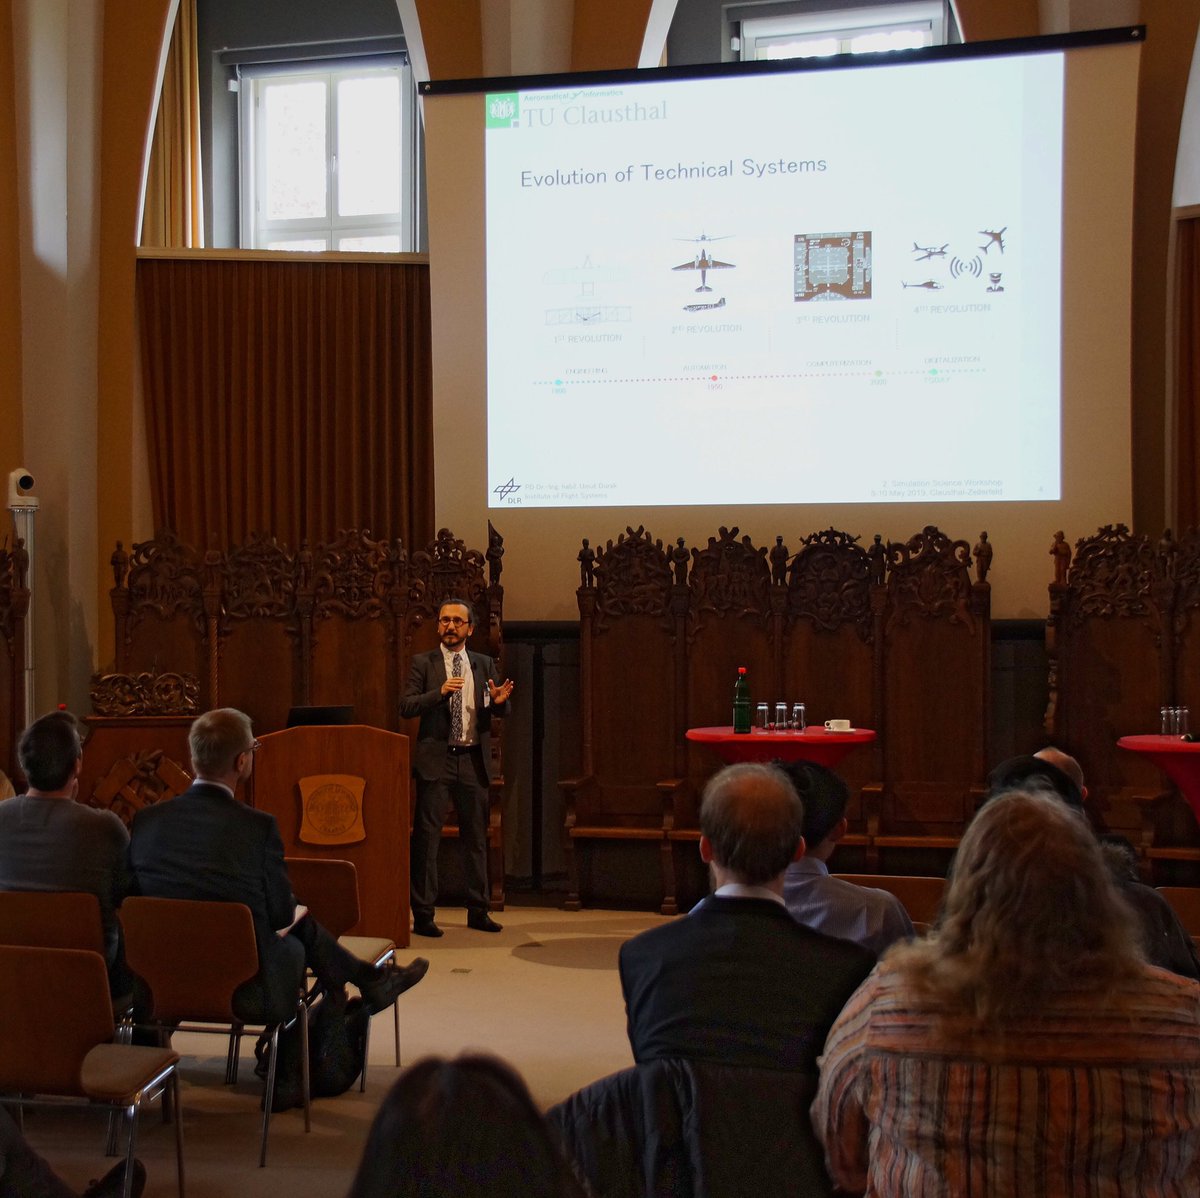 Umut Durak made an impulse presentation for the panel discussion on teaching modeling and simulation at the age of digitalization at 2. Simulation Science Workshop.
. #tuclausthal #digitalization #cyberphysicalsystems #modelingandsimulation #simulation